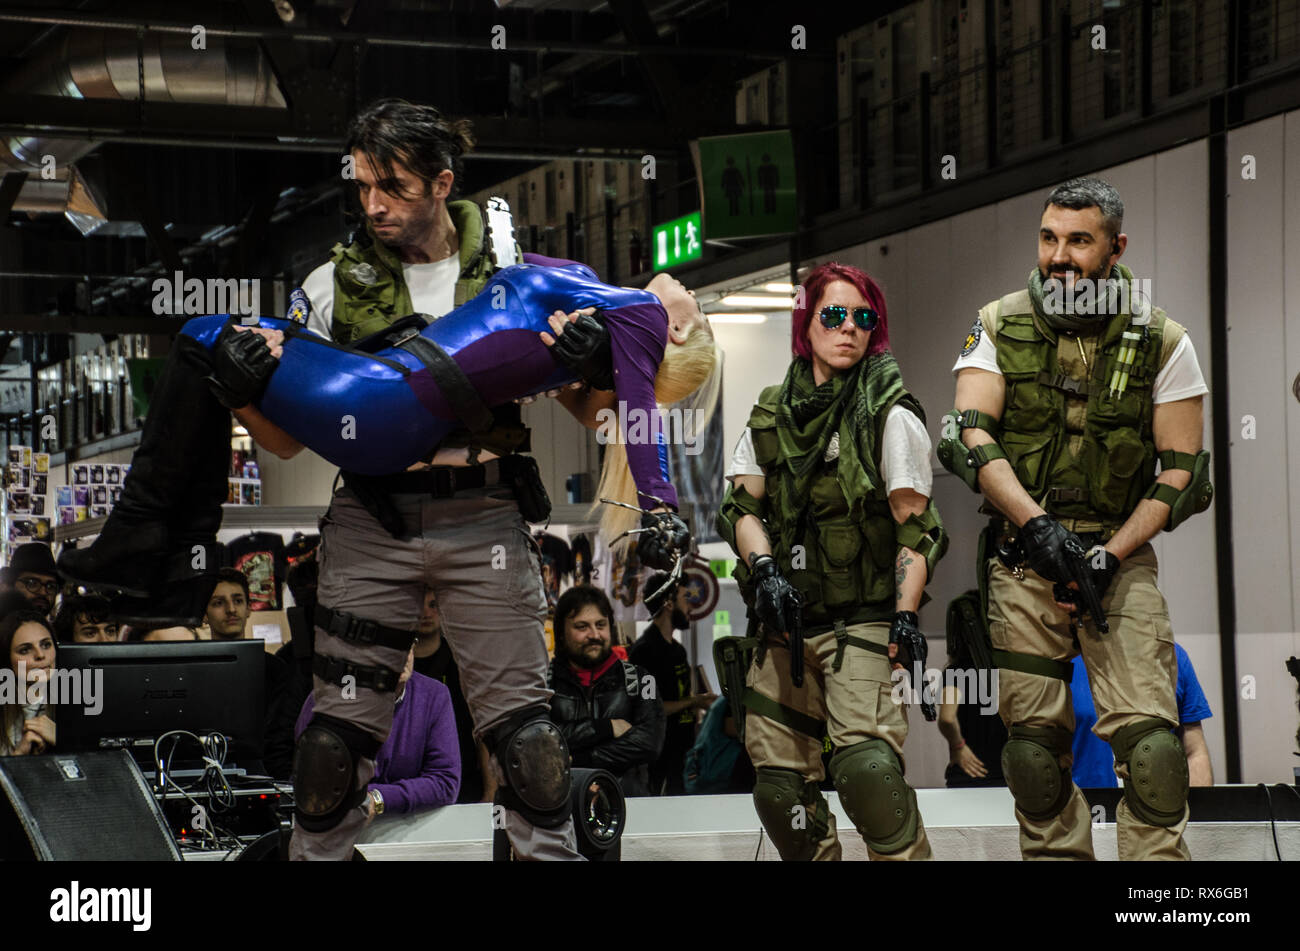 Milan, Italy. 8th Mar 2019. Resident Evil Reenactment group performs a show during Cartoomics in Milano. March 8th, 2018 Credit: Pandarius/Alamy Live News Stock Photo